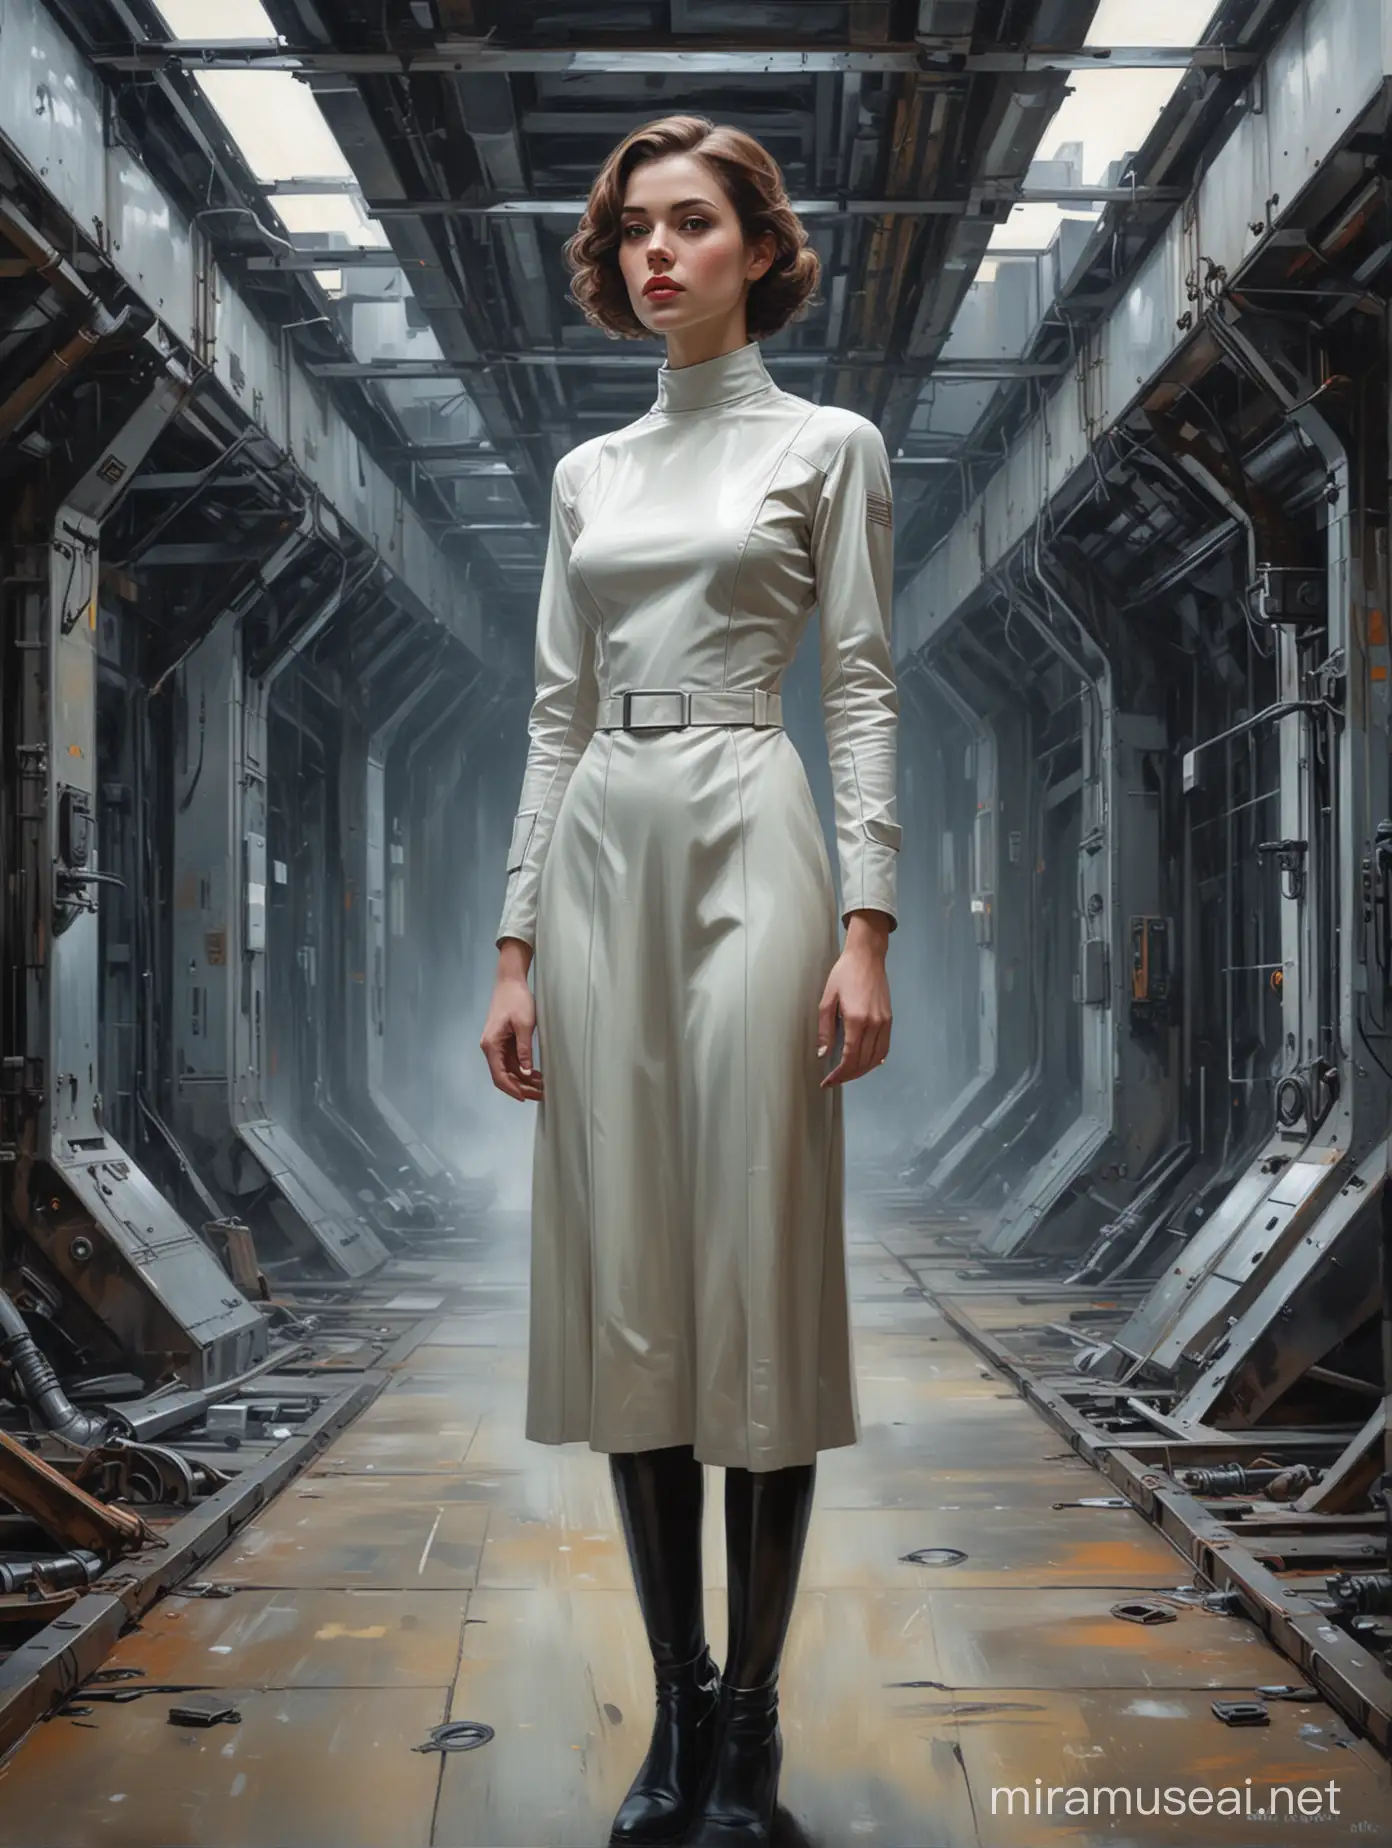 Caught in a moment of quiet amidst the metal confines of a bygone era's space, she stands— a stark contrast of futurism to the vintage scene around her, Oil Painting,